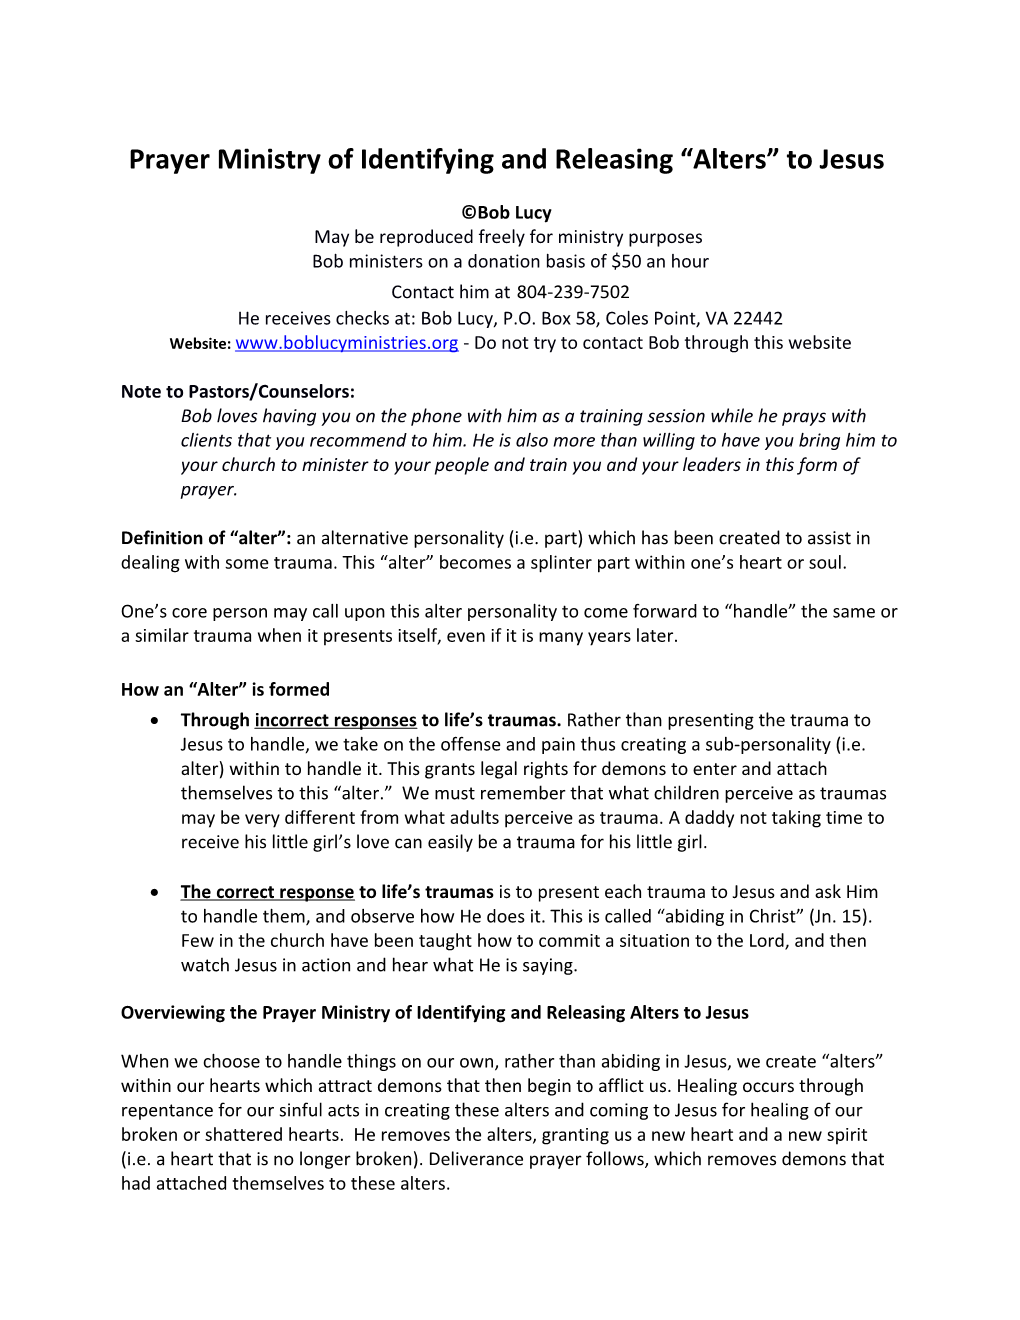 Prayer Ministry of Identifying and Releasing Alters to Jesus